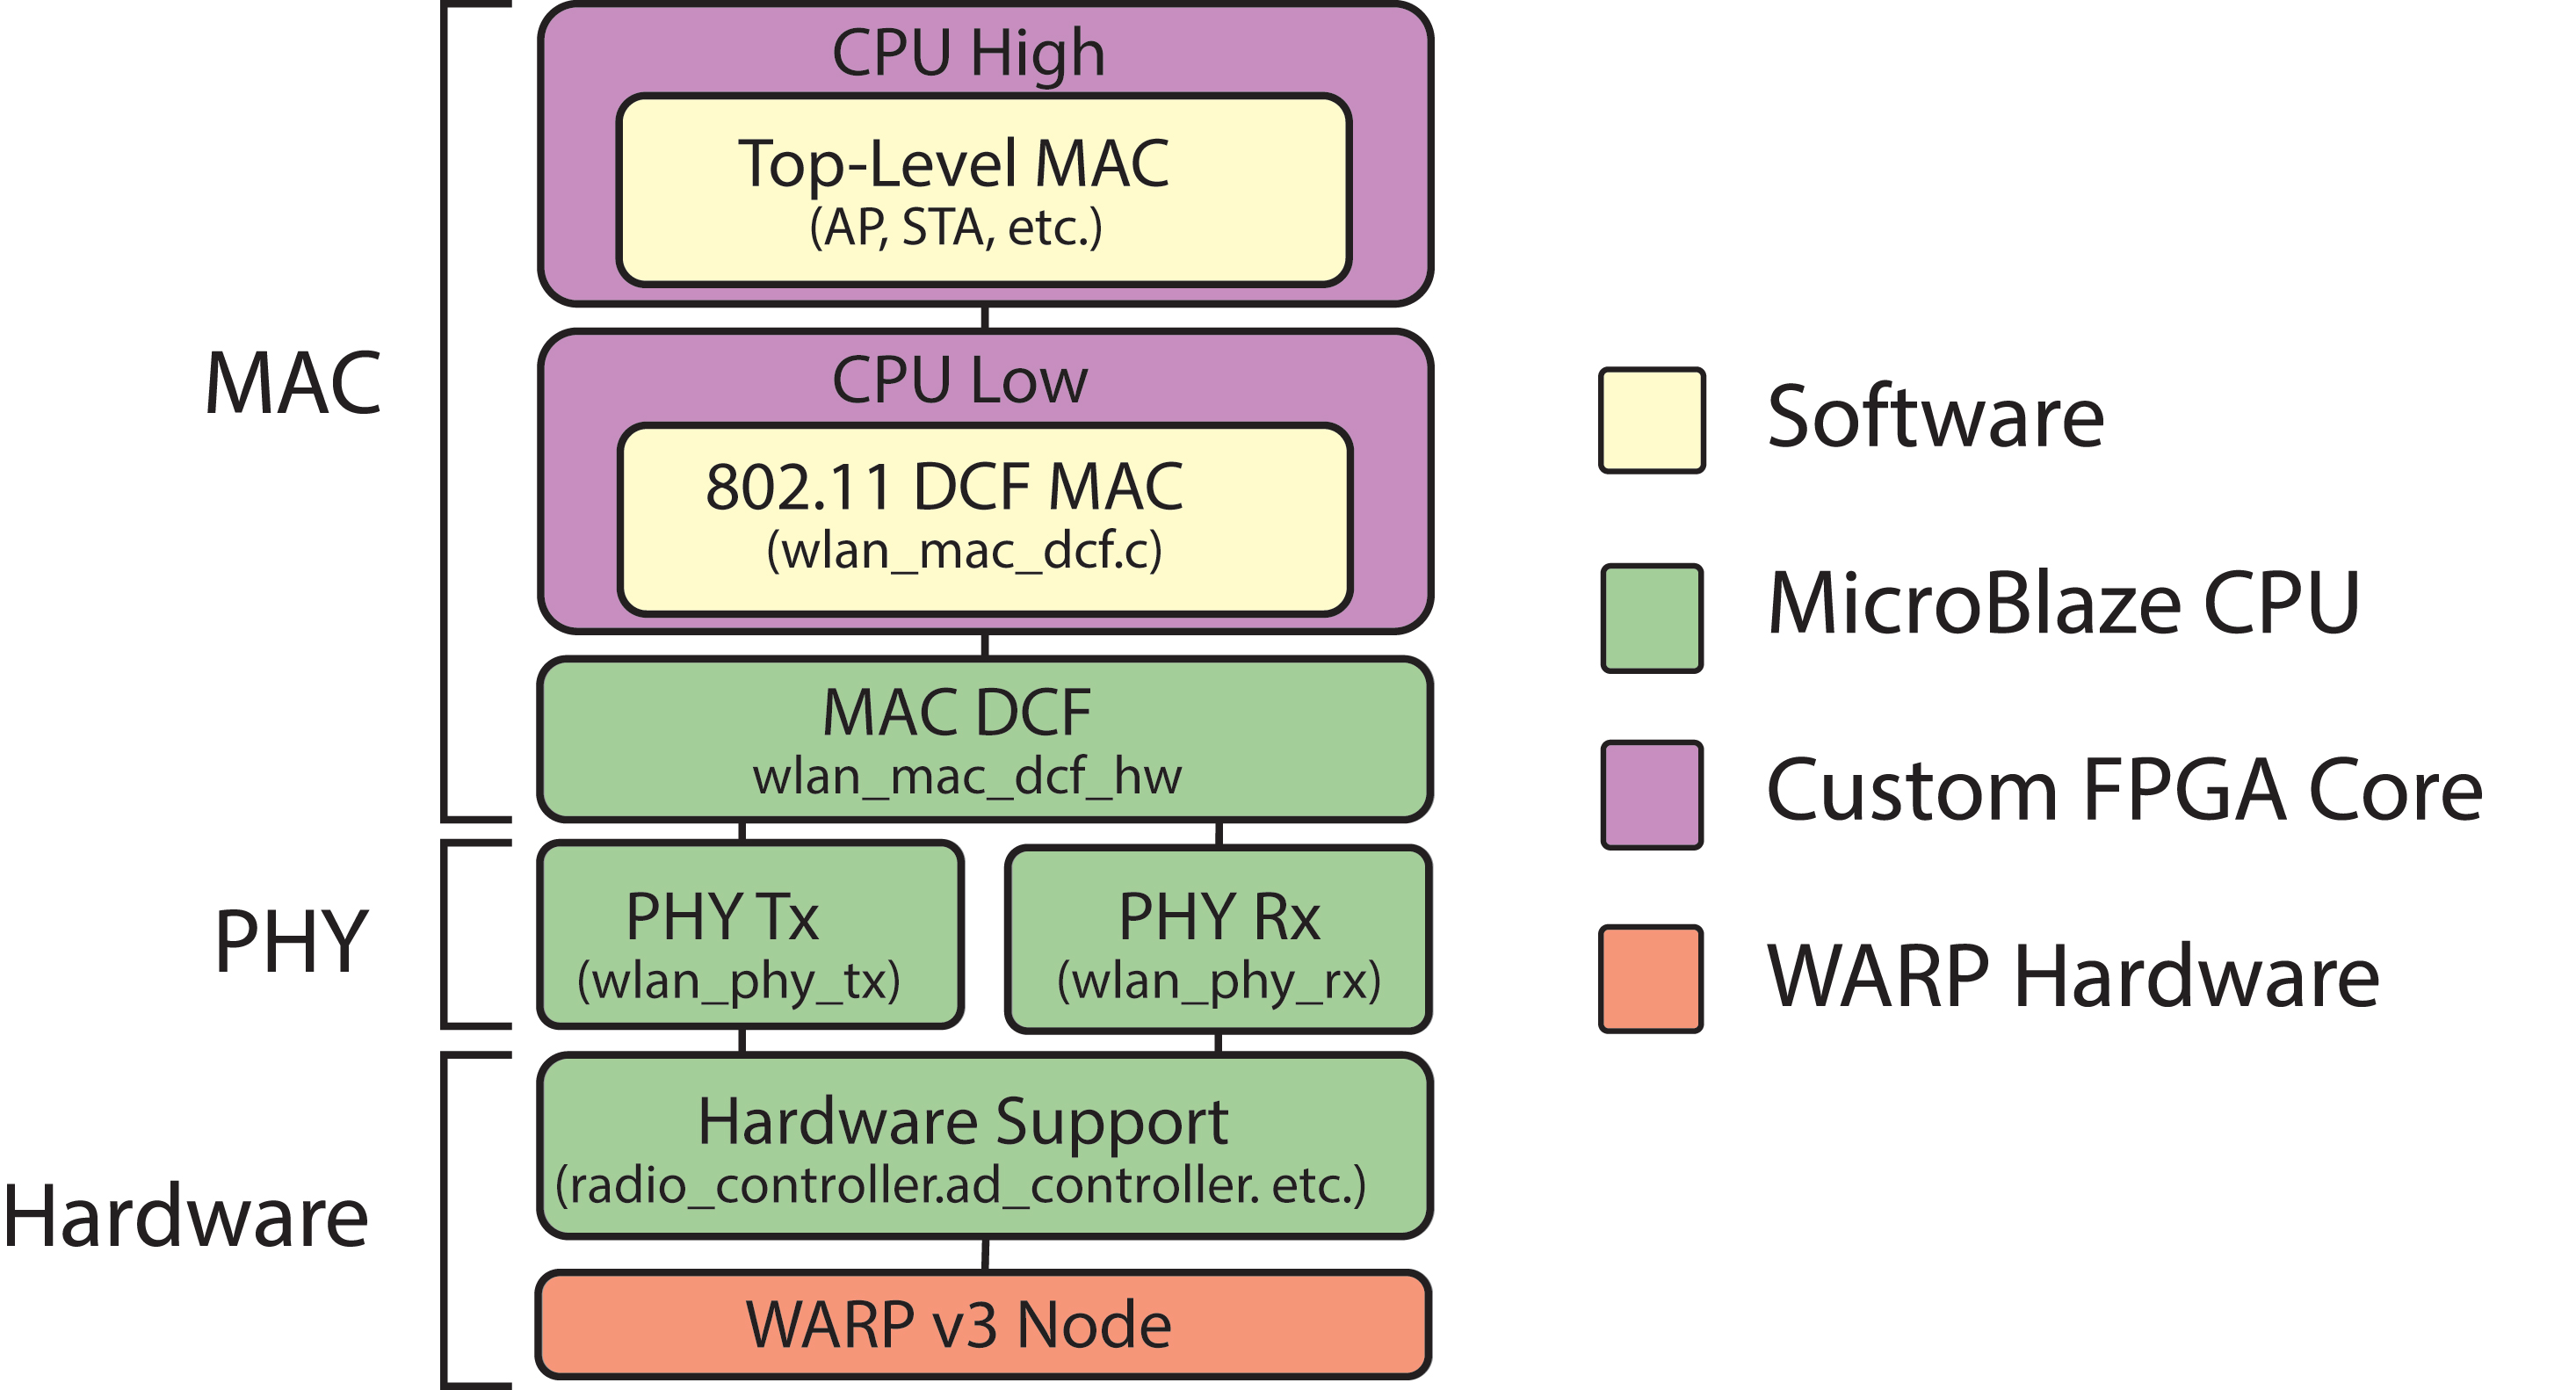 Figure 3 - The Mango 802.11 Reference Design architecture includes two Xilinx MicroBlaze CPUs for the MAC and custom System Generator cores for the PHY transmitter and receiver.